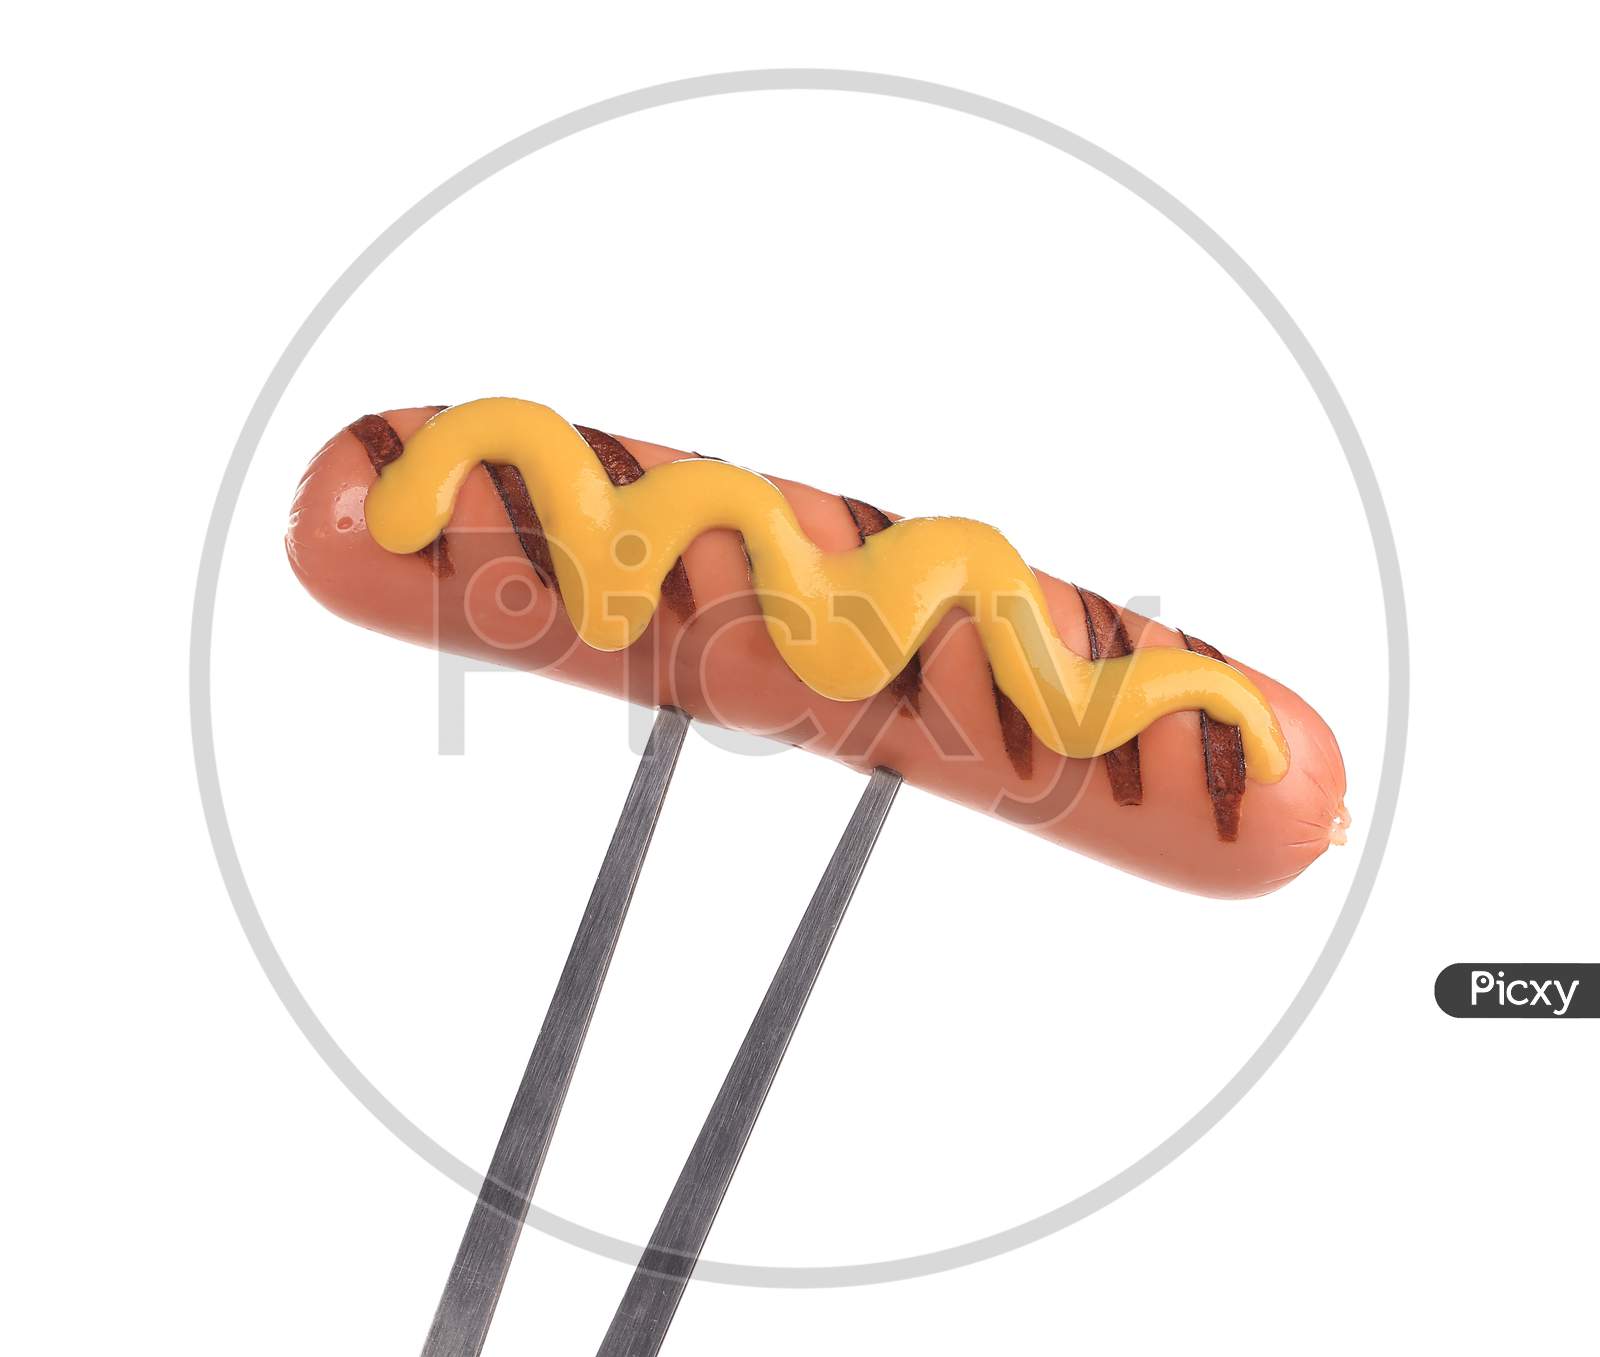 Grilled Sausage On A Fork. Isolated On A White Background.